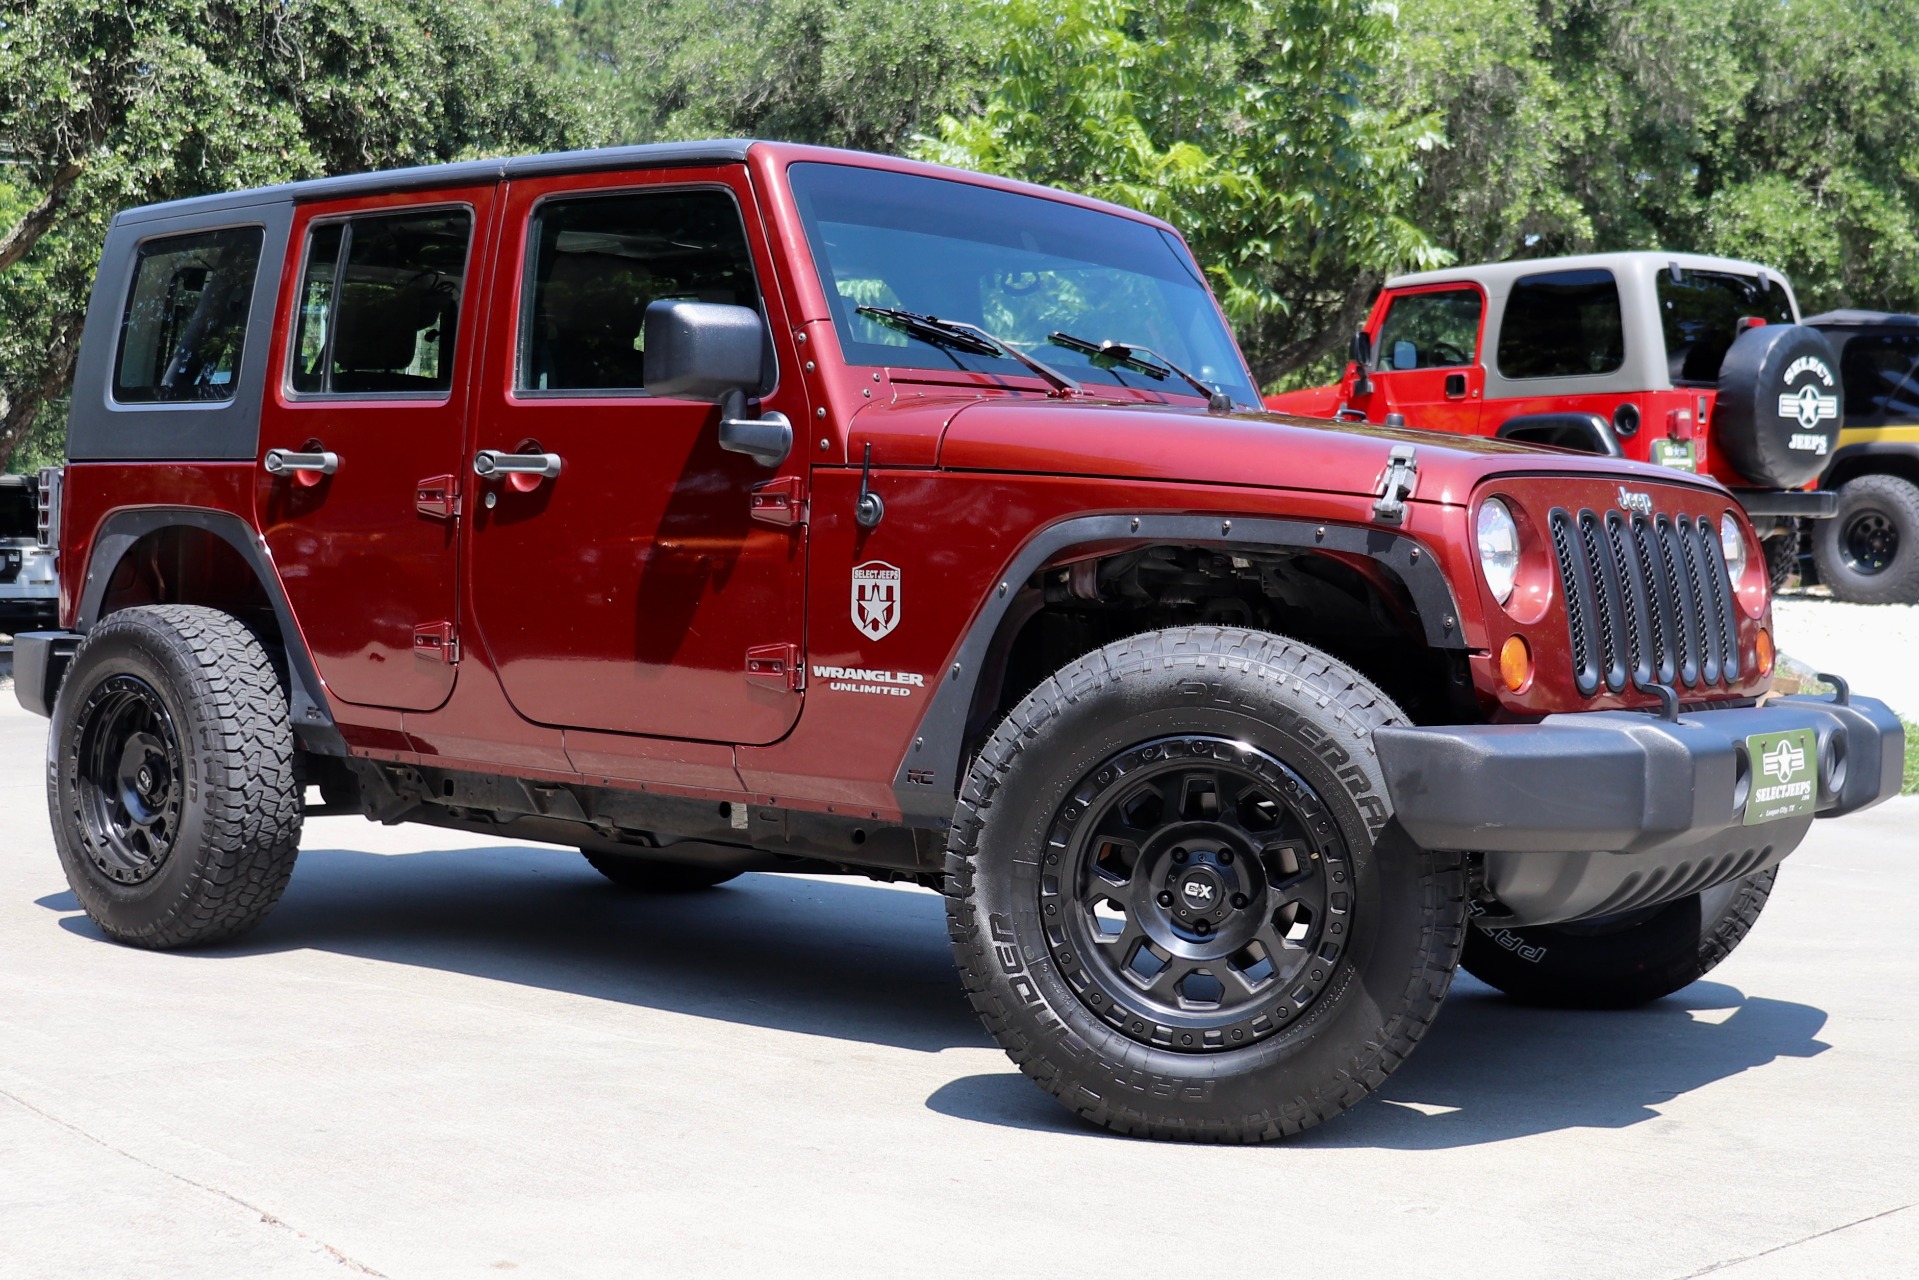 Used 2007 Jeep Wrangler Unlimited X For Sale ($17,995) | Select Jeeps Inc.  Stock #109205